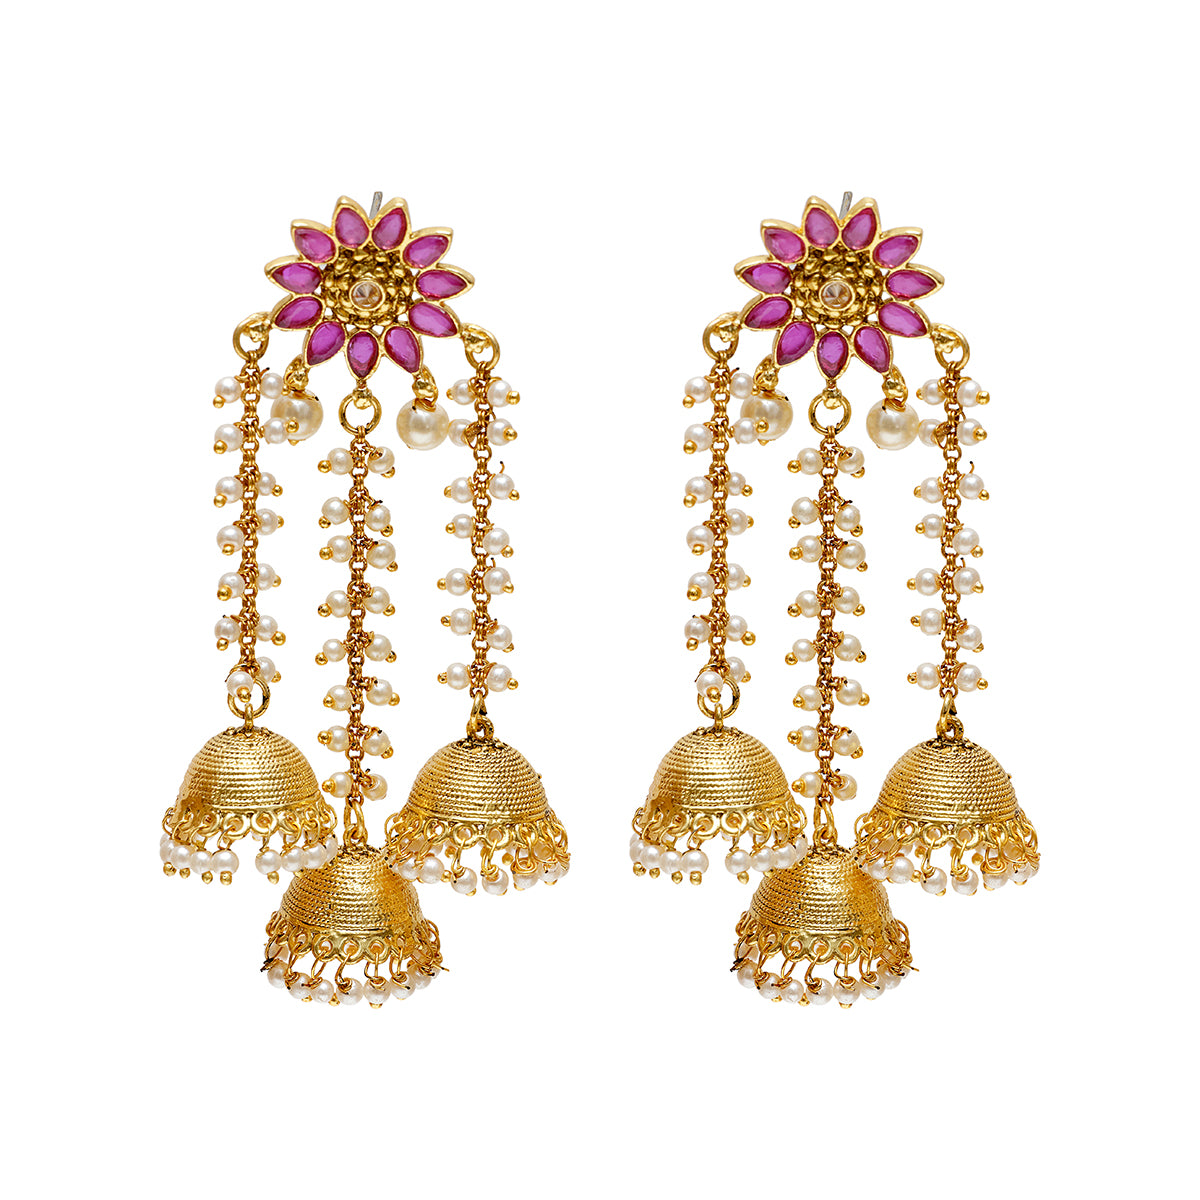 Designer antique earrings with lakshmi carving, beads and pearl hangings,  plated … | Gold earrings designs, Jewelry design earrings, Gold jewellery  design necklaces